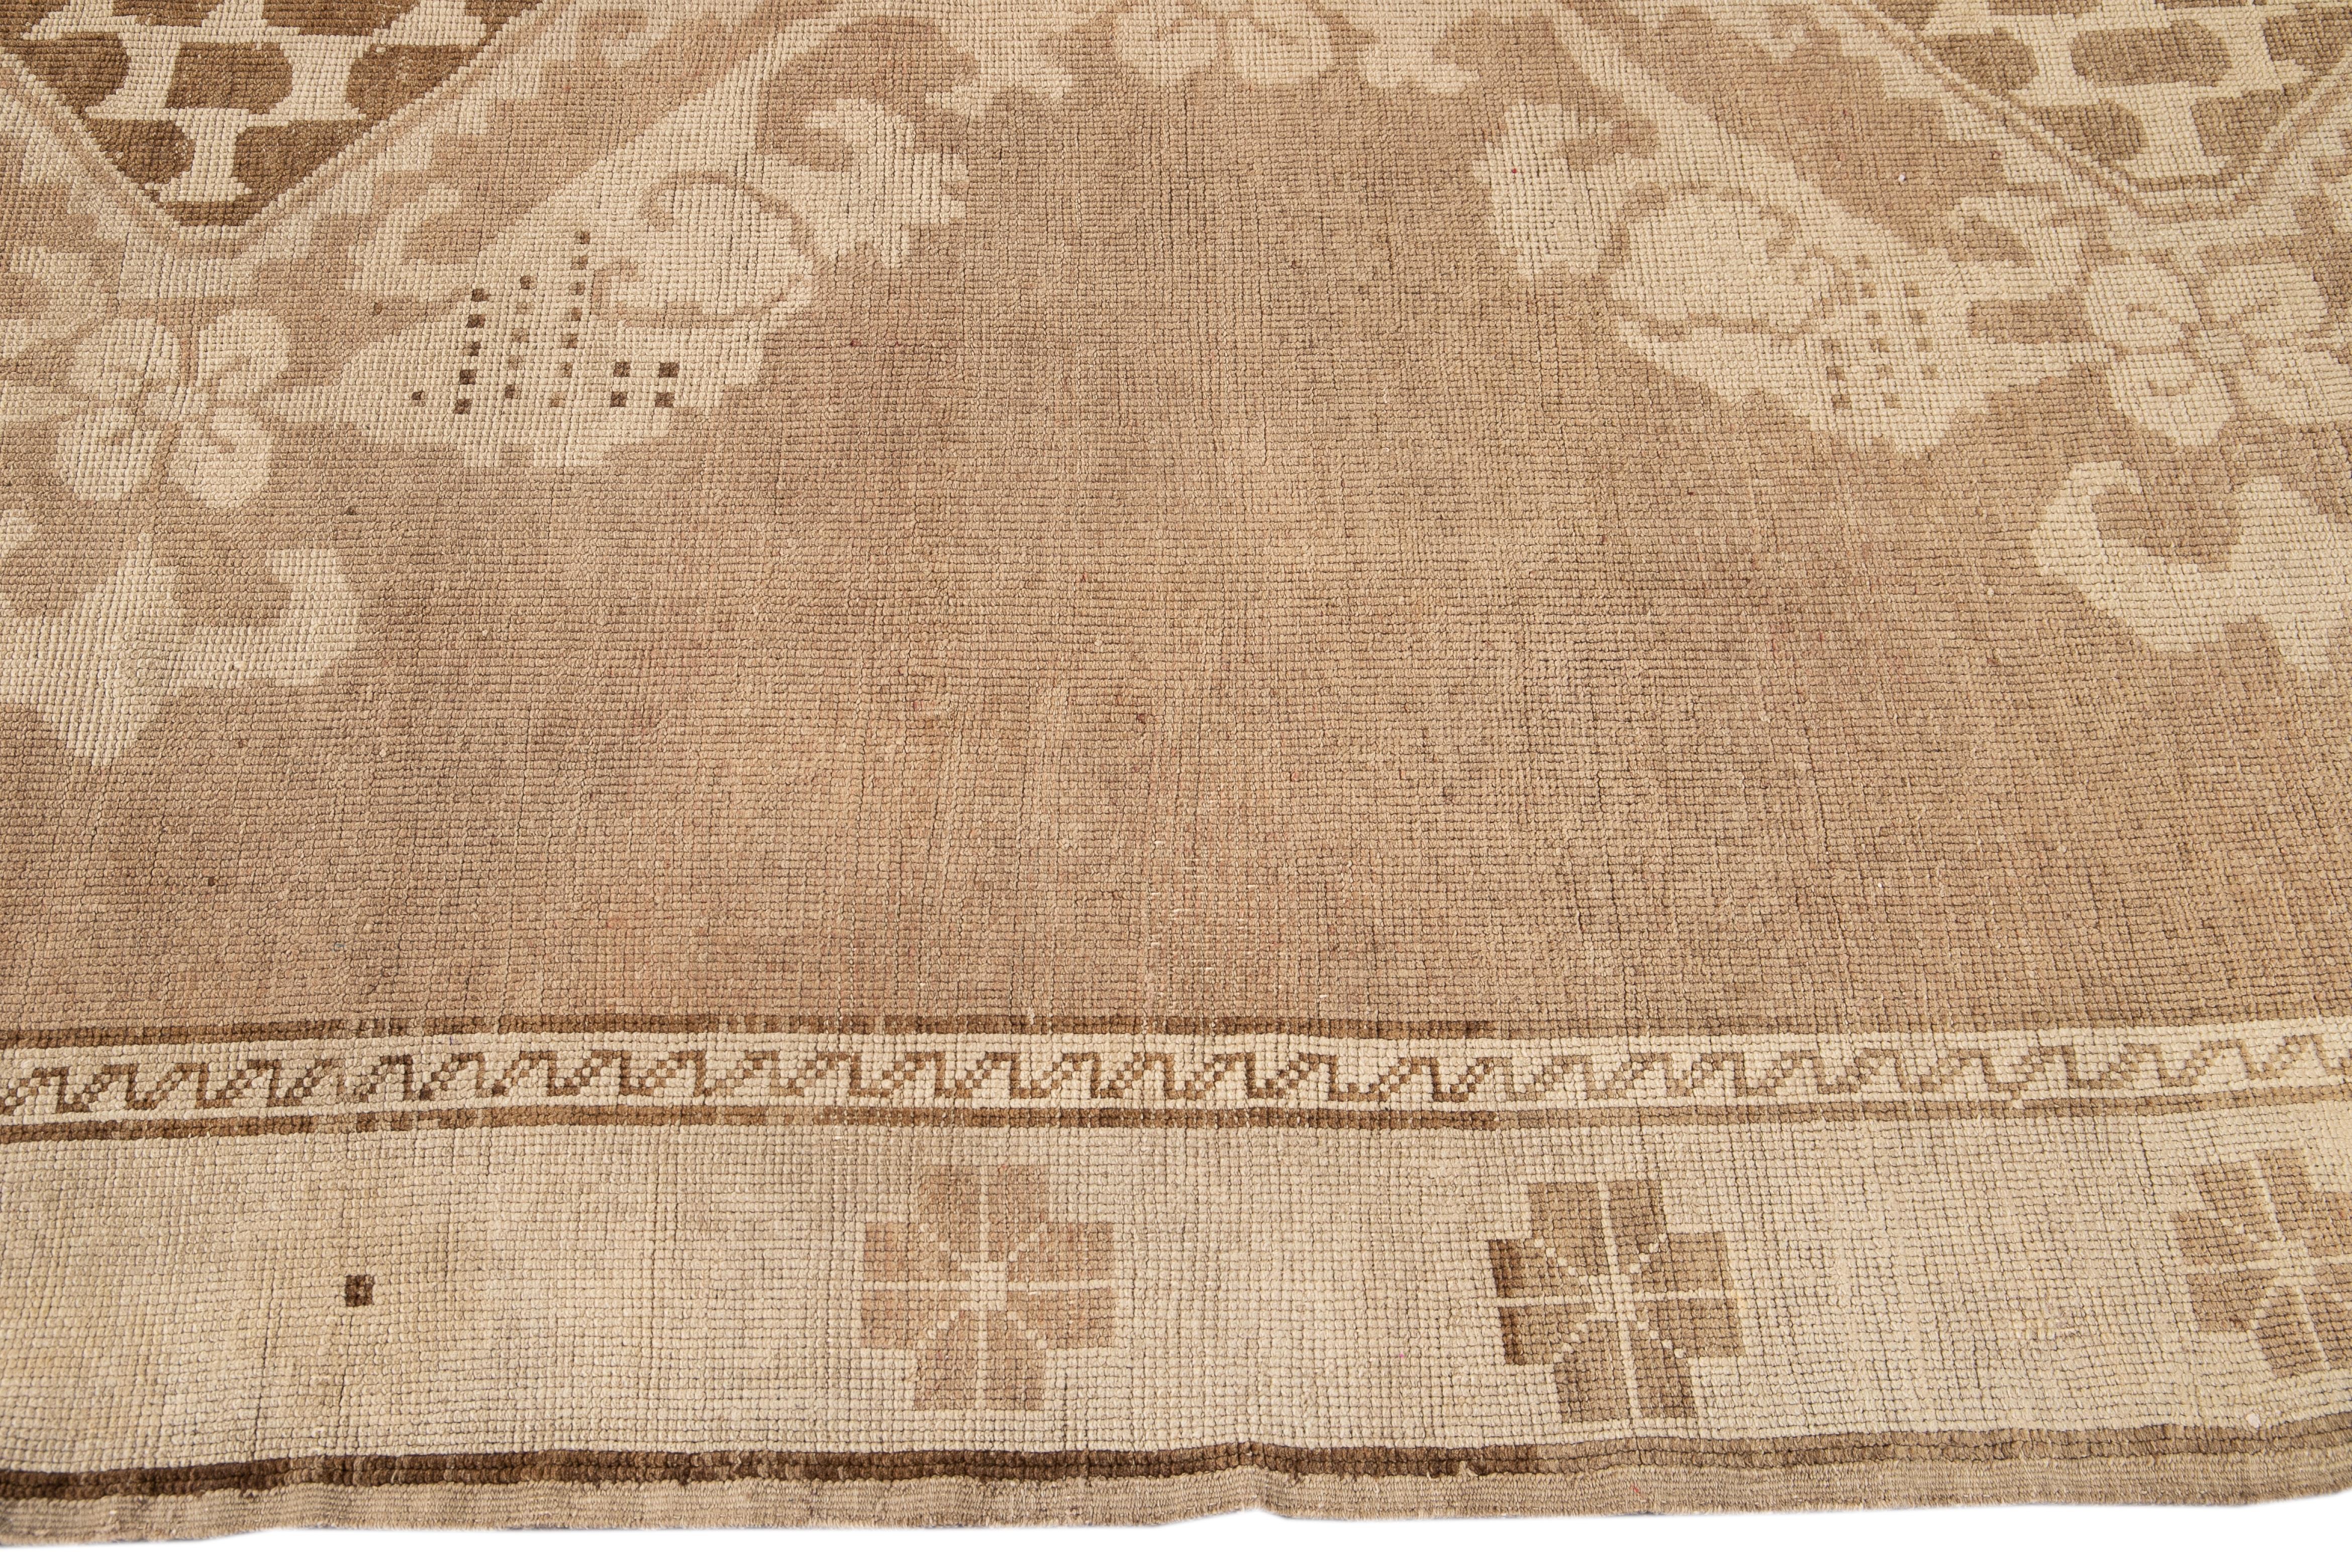 Early 20th Century Brown Antique Khotan Wool Rug with Medallion Design In Excellent Condition For Sale In Norwalk, CT